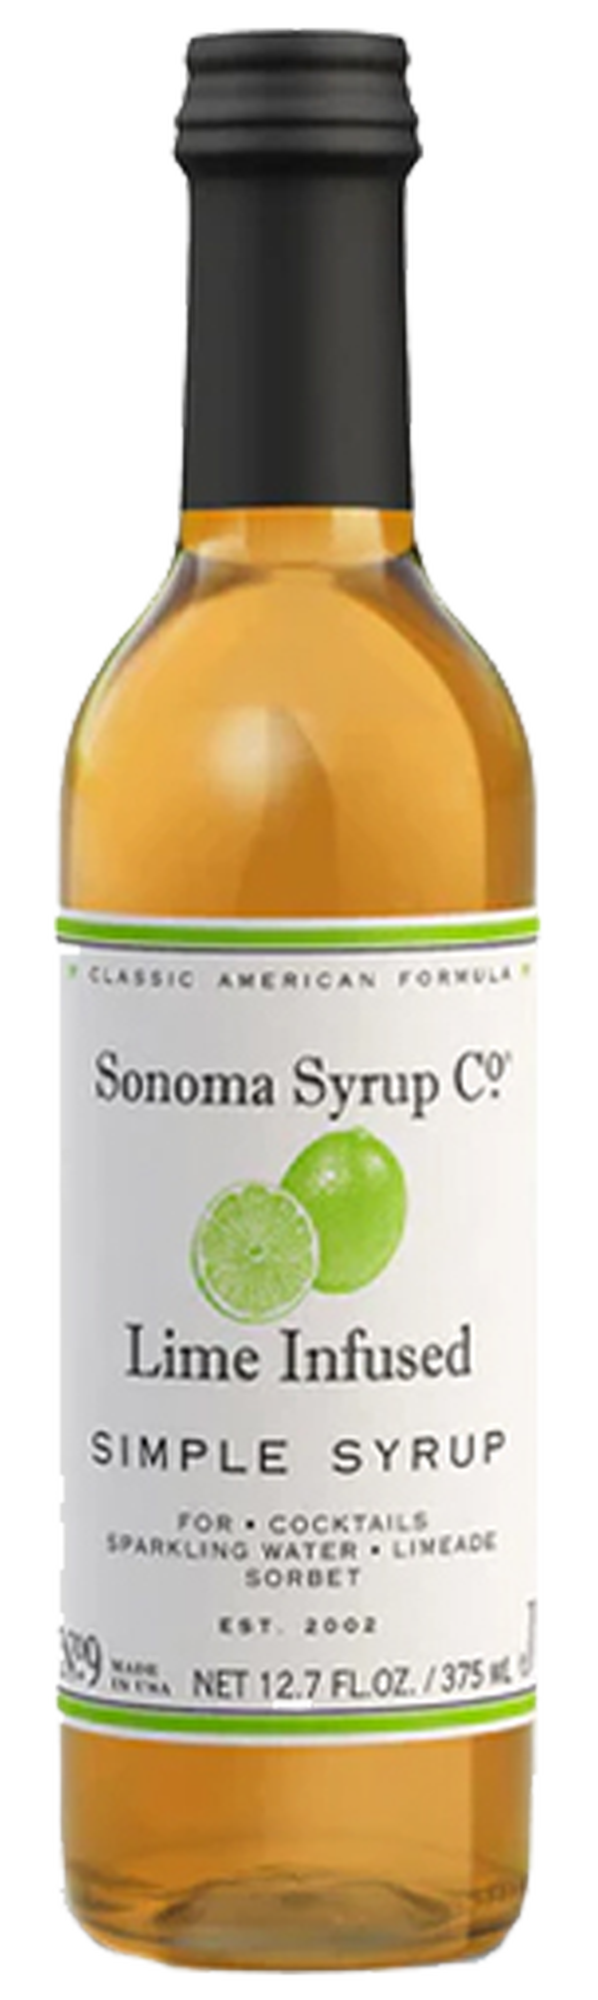 Sonoma Syrup Co Lime Infused Simple Syrup